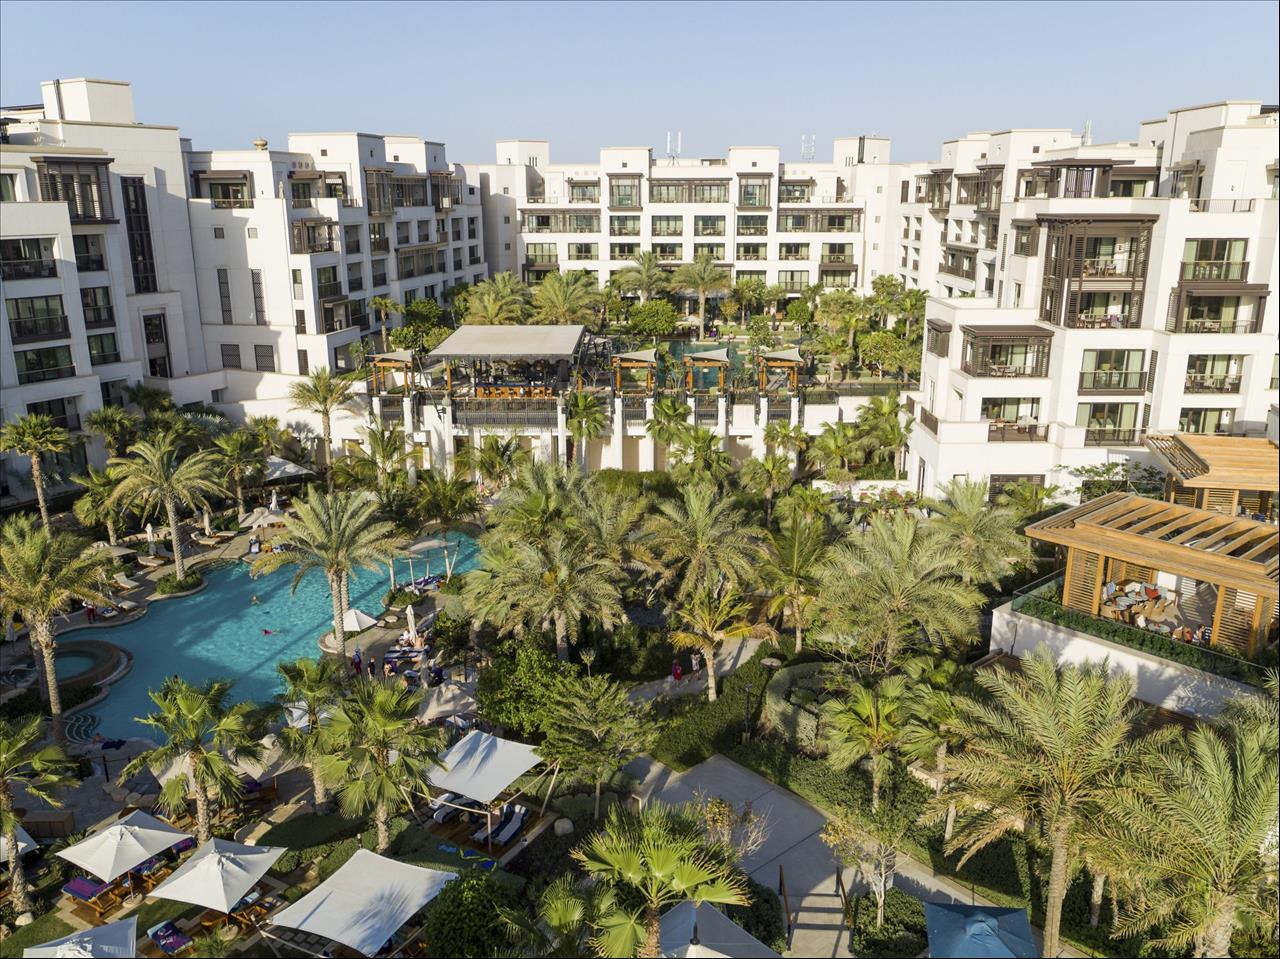 JUMEIRAH HOTELS & RESORTS RECOGNISED FOR SERVICE EXCELLENCE BY FORBES TRAVEL GUIDE 2022